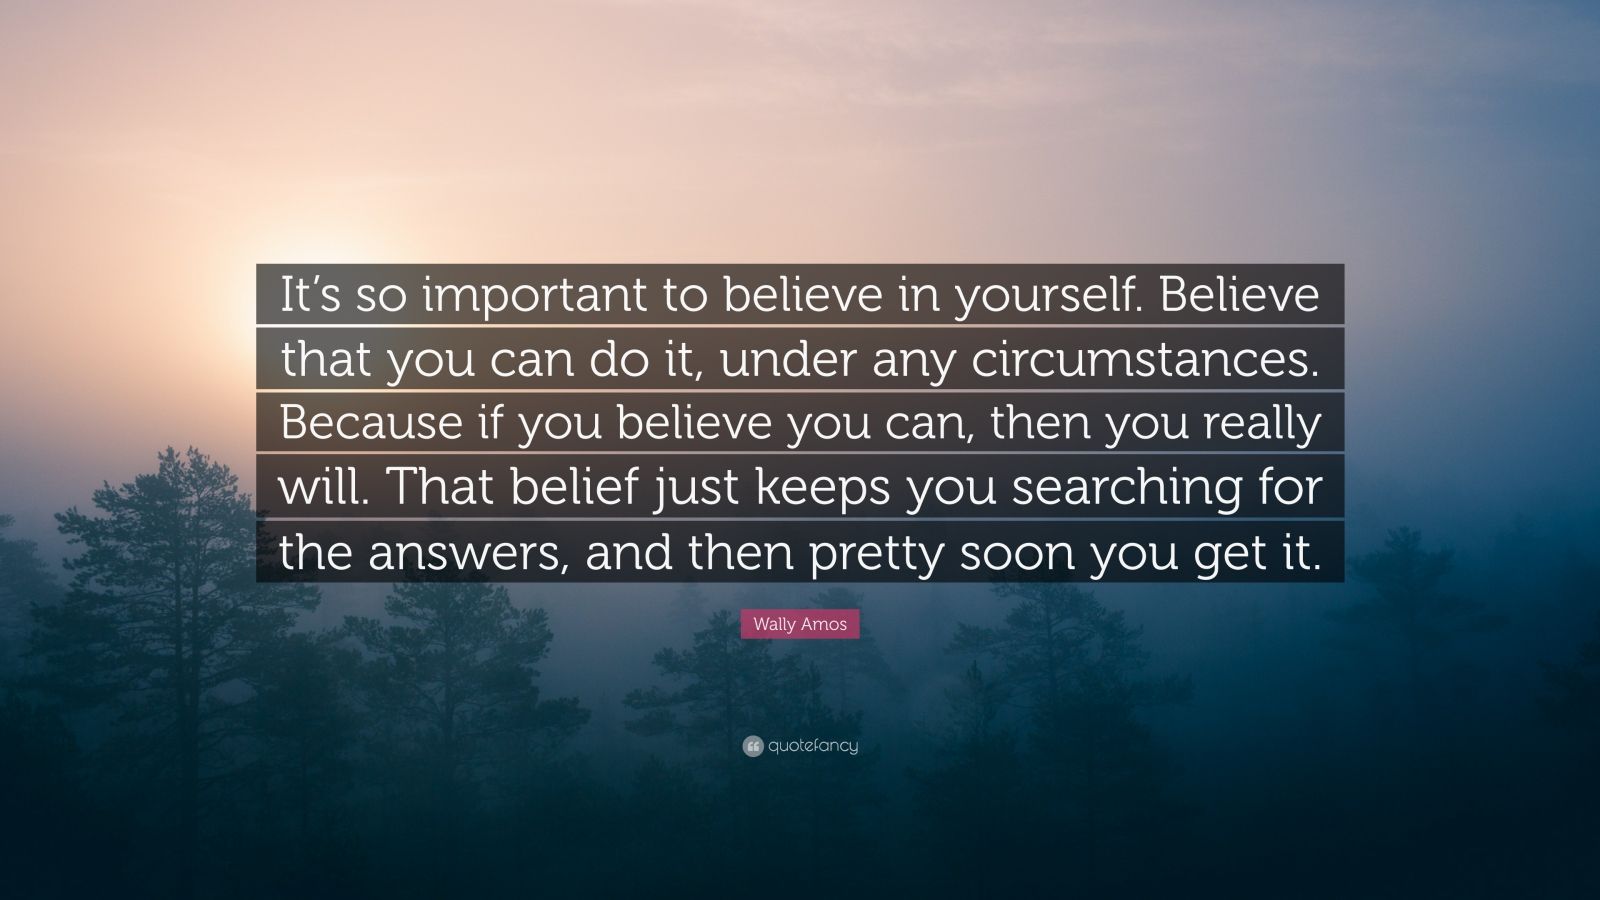 Wally Amos Quote: “It's so important to believe in yourself. Believe that  you can do it, under any circumstances. Because if you believe yo...”